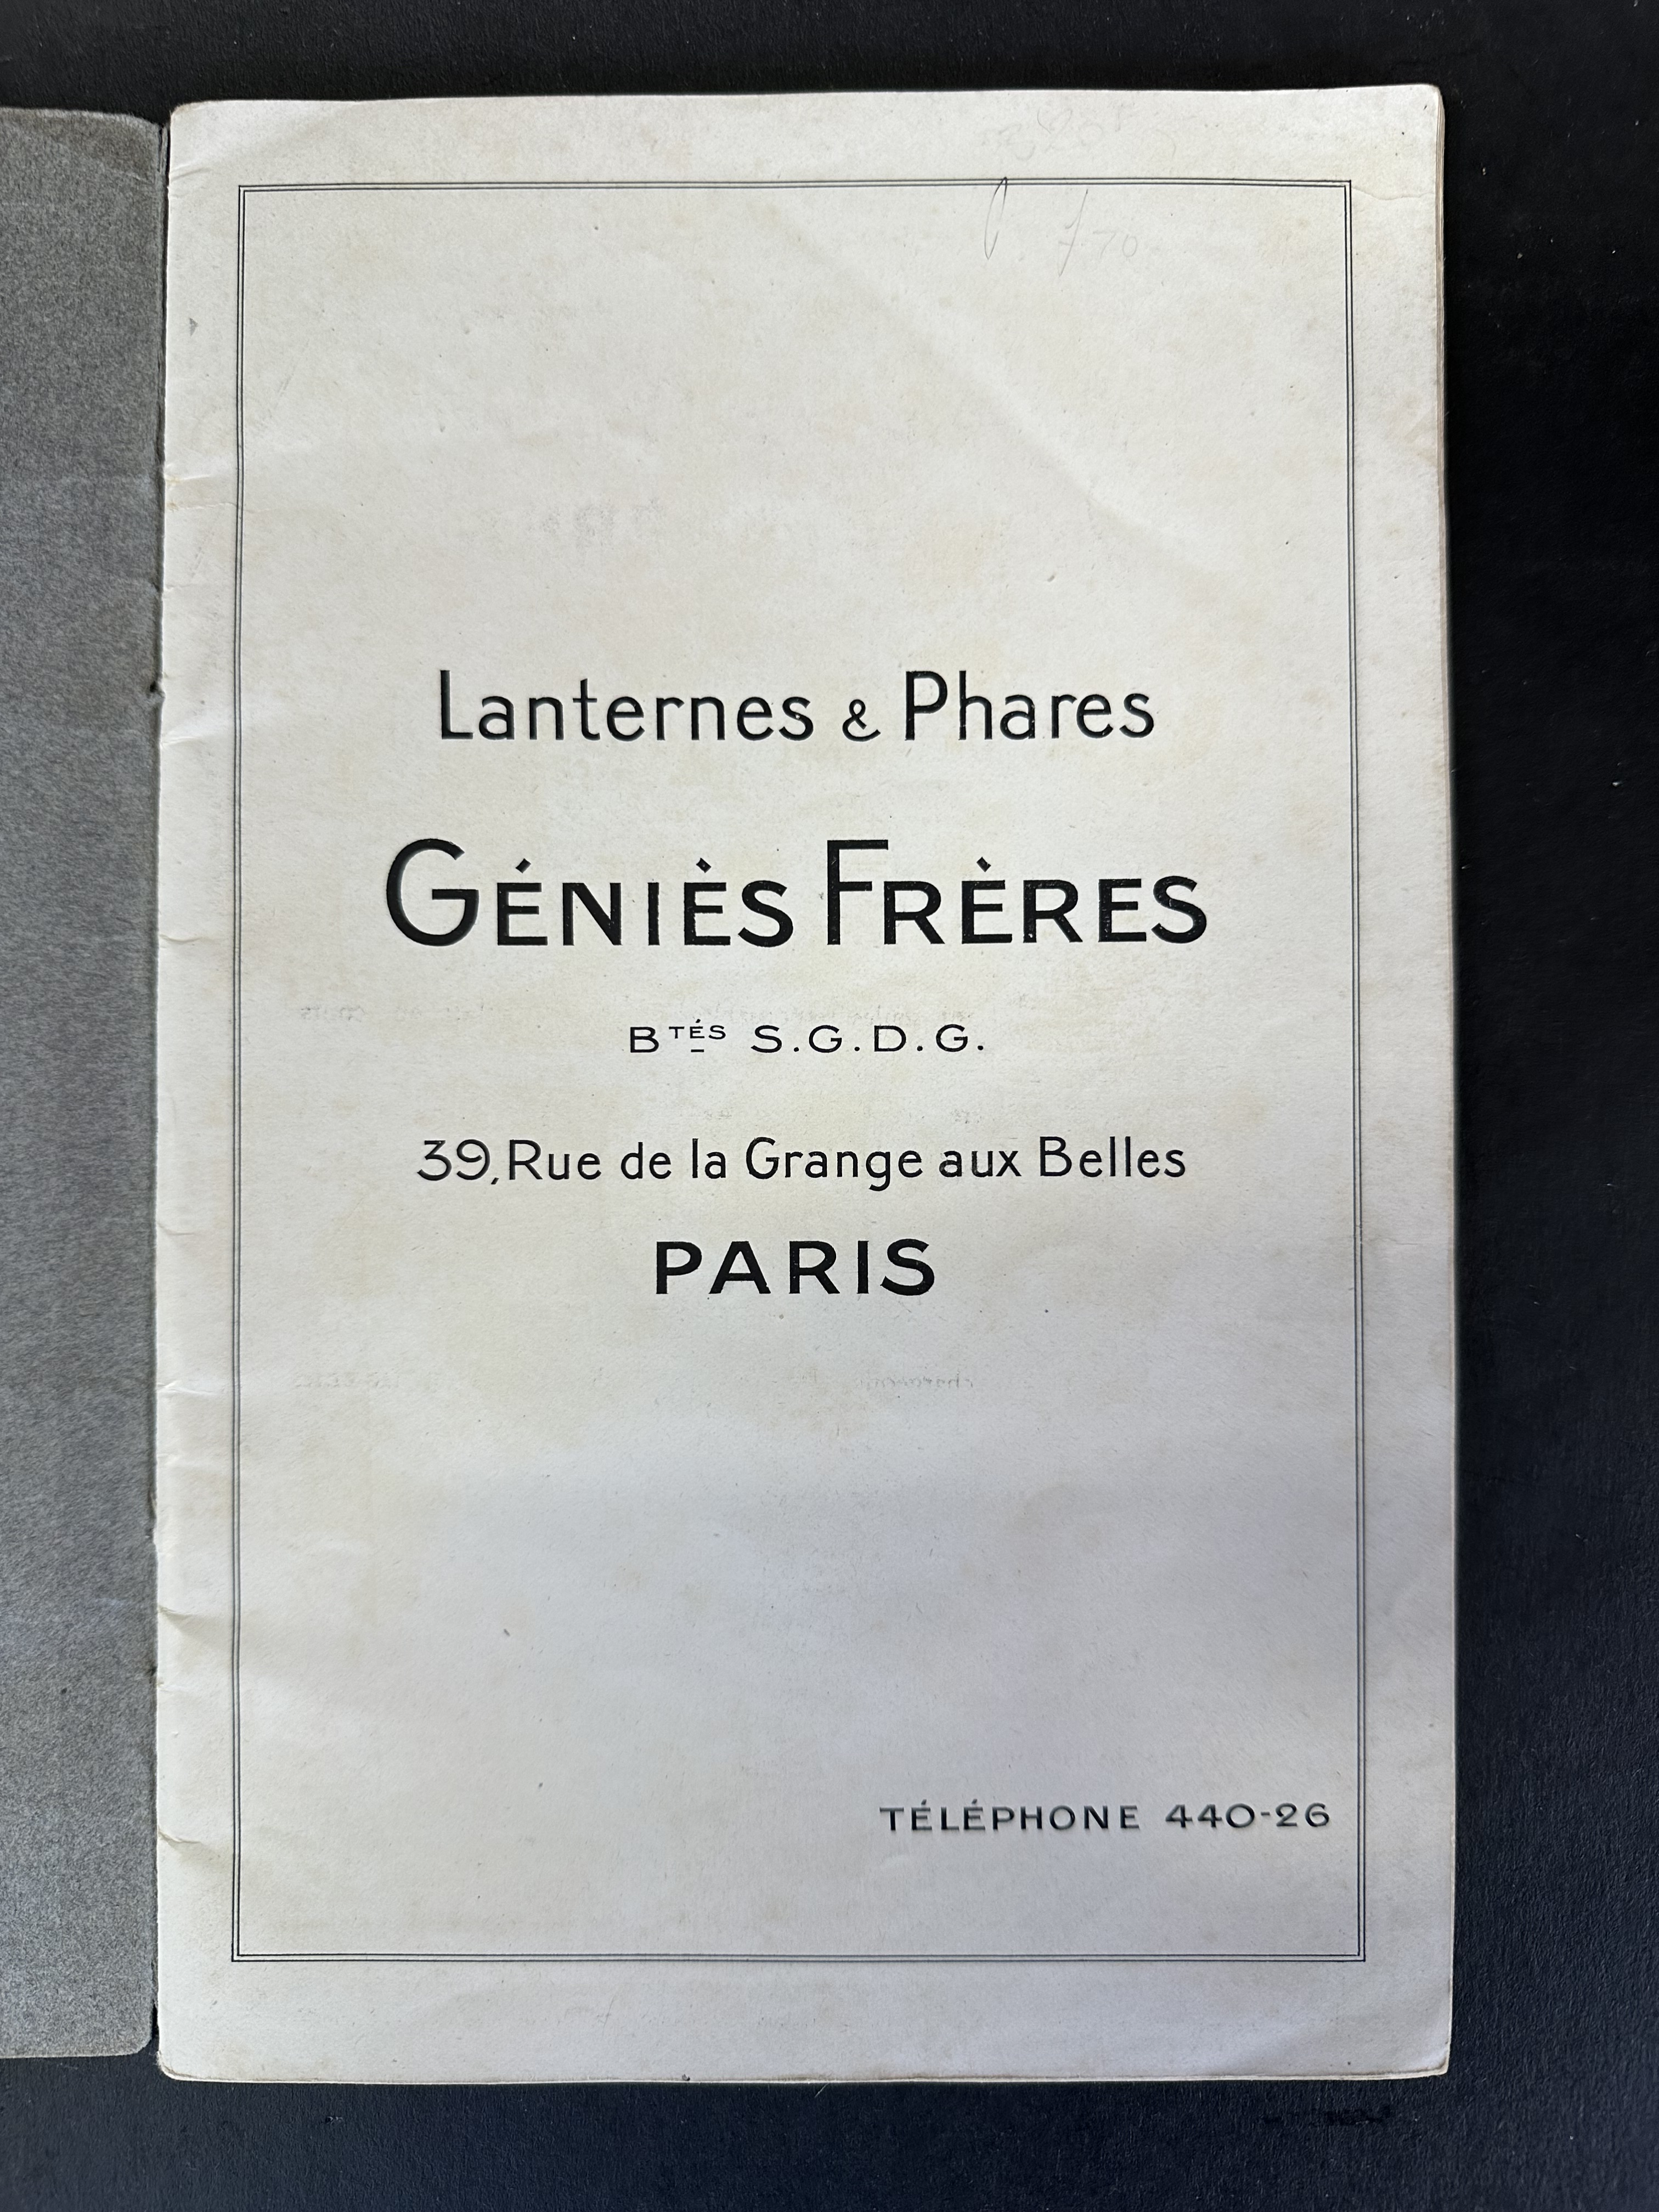 A rare 1912 sales brochure for Lanternes & Phares 'Genies Freres, Paris, beautifully illustrated - Image 2 of 14